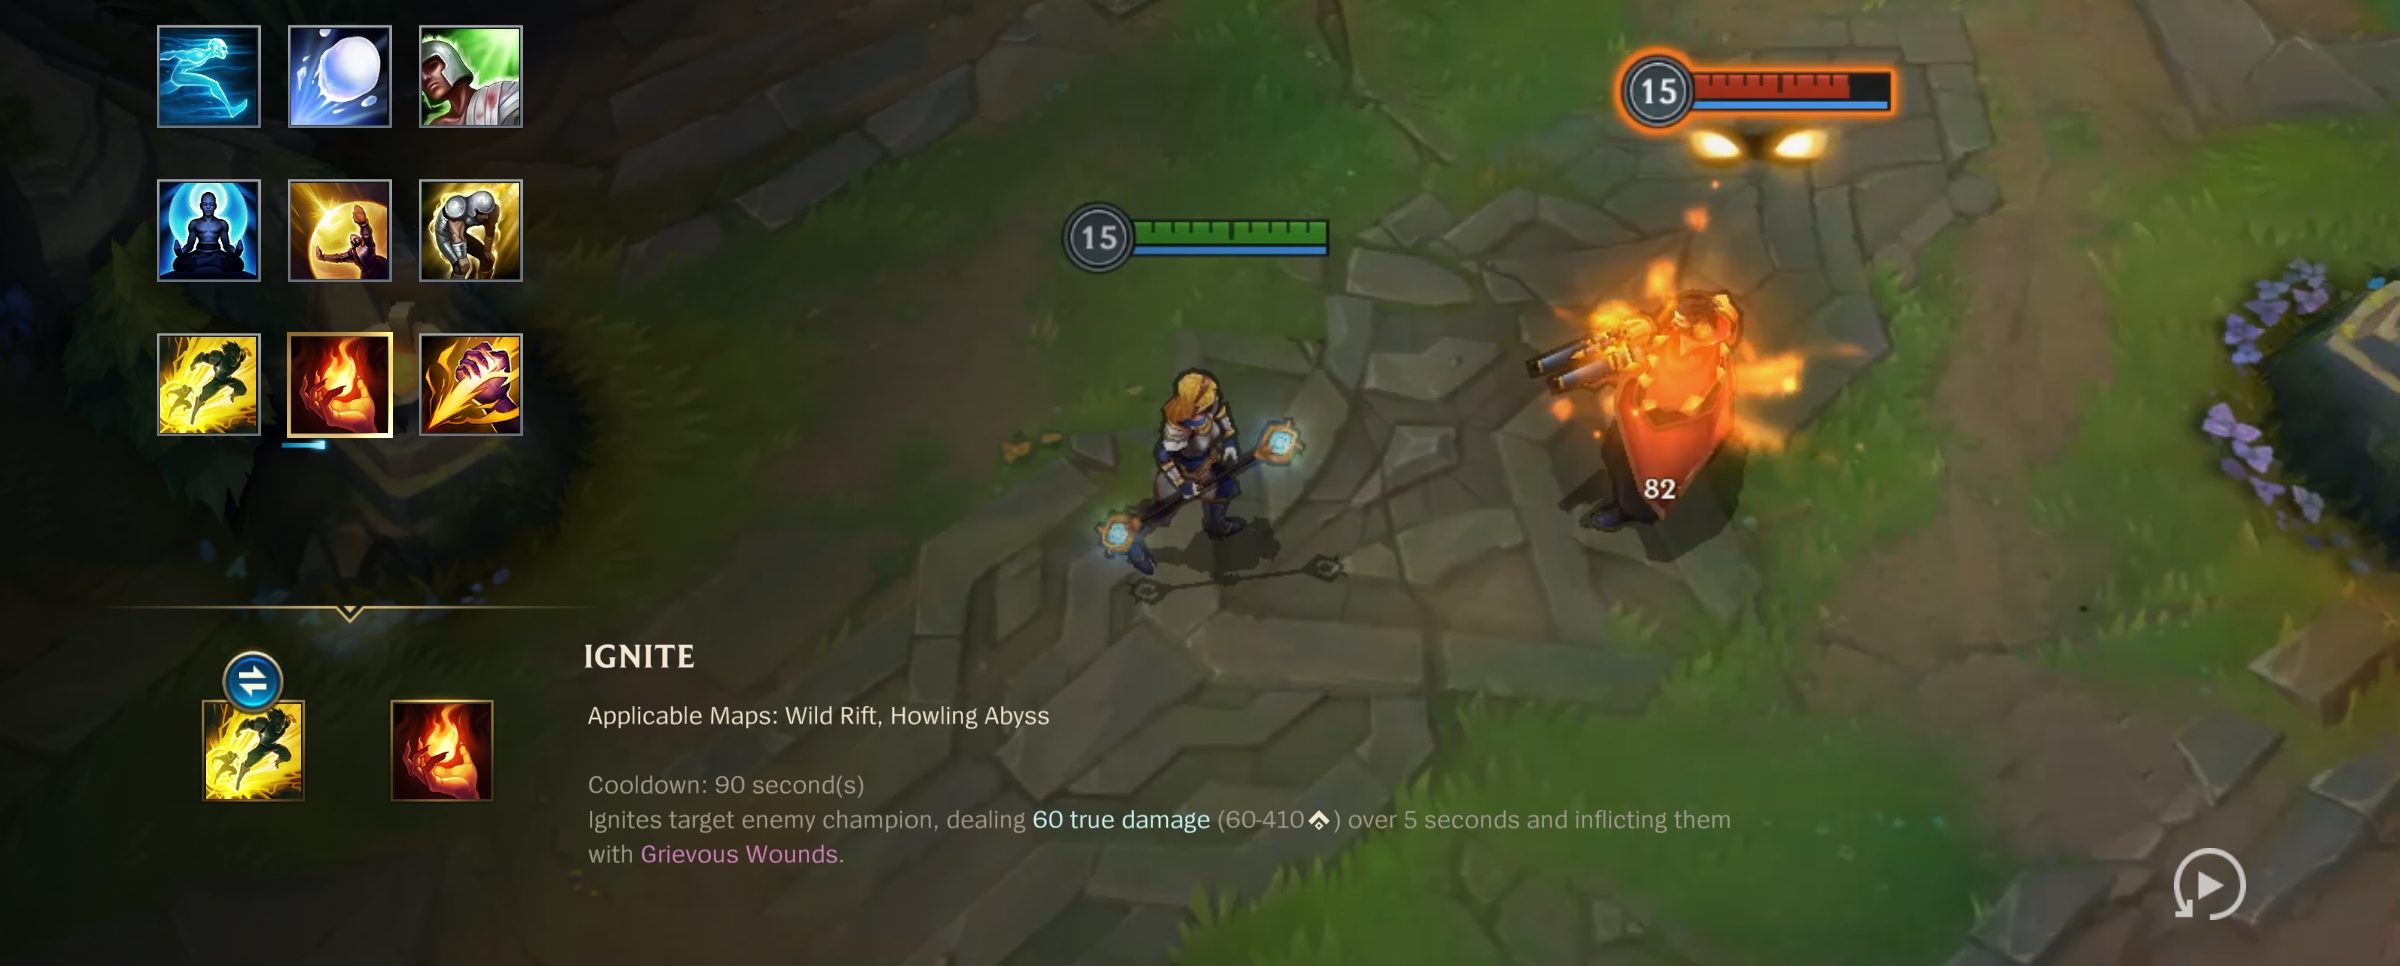 What Does FF Mean in League of Legends? 